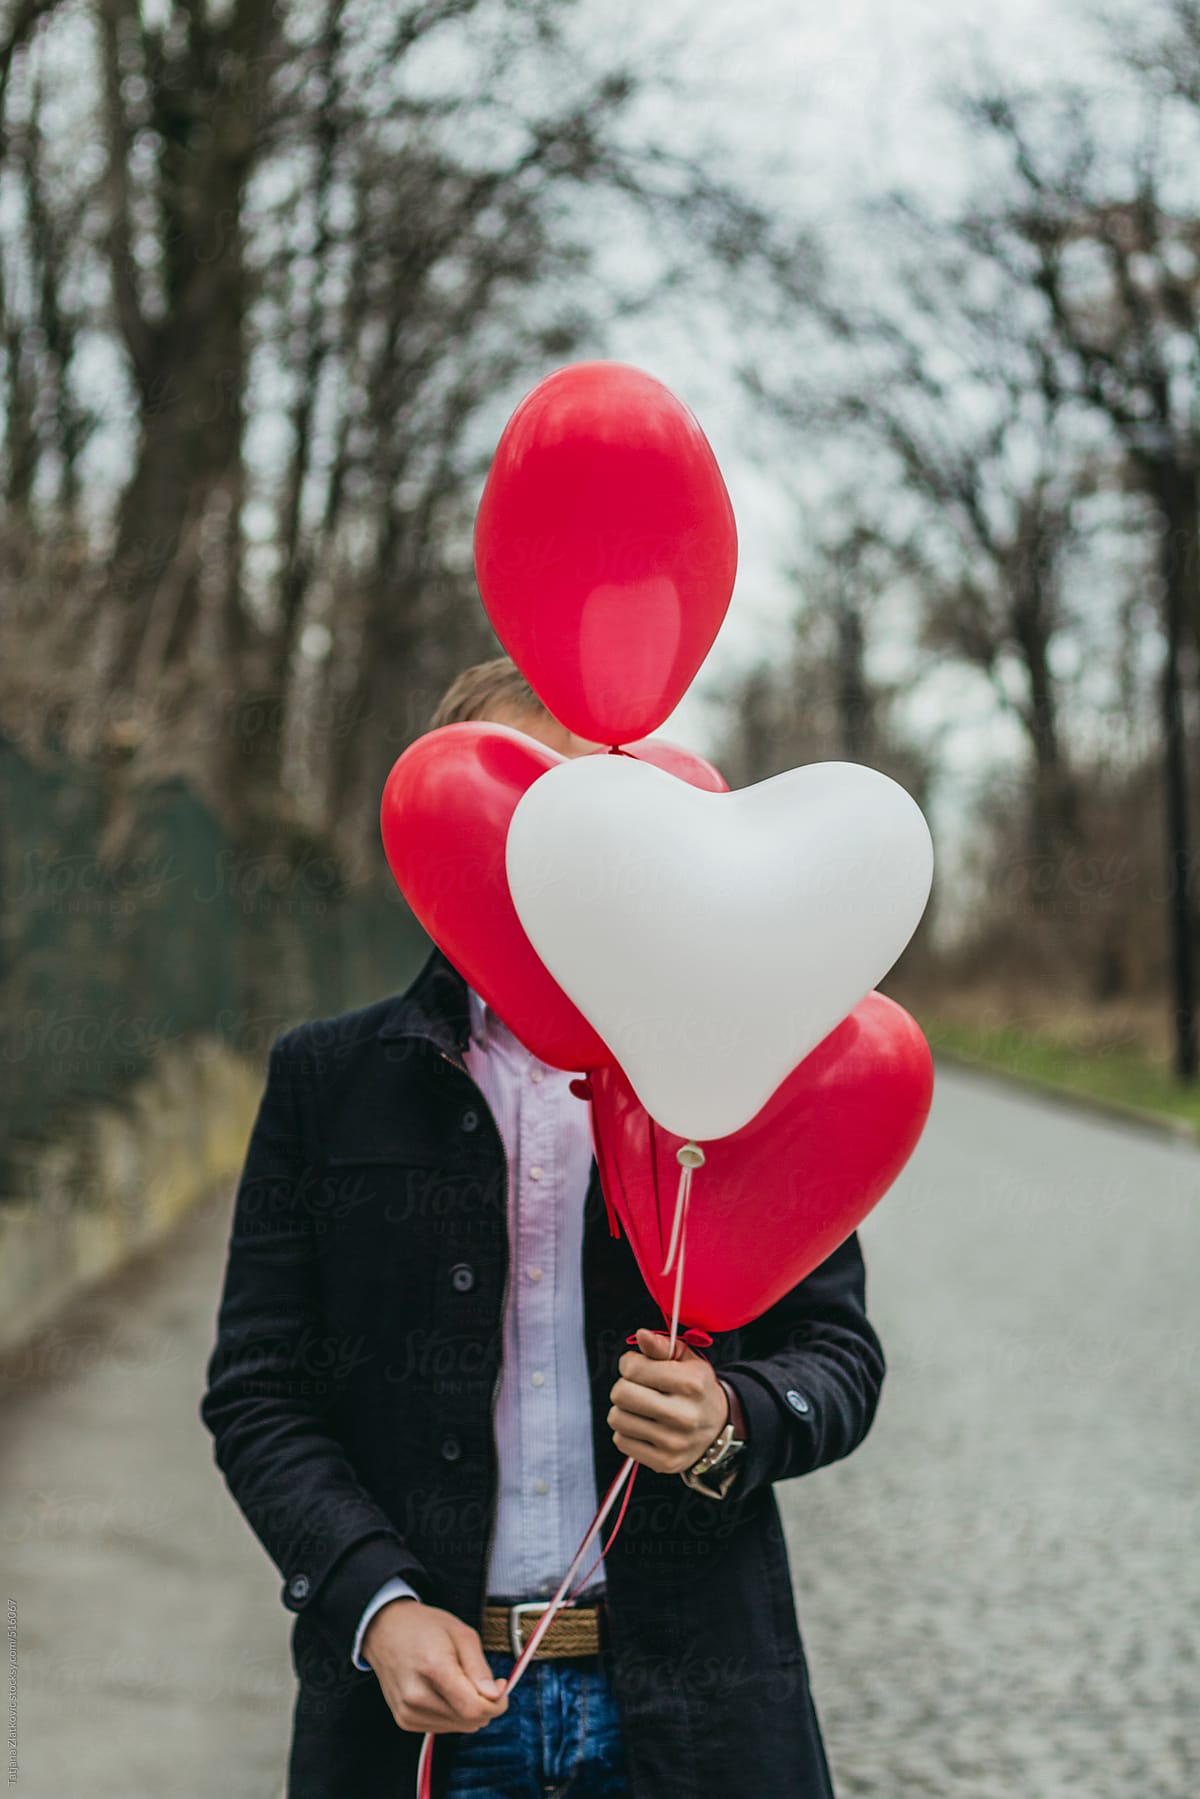 A young man holding heart shaped balloons